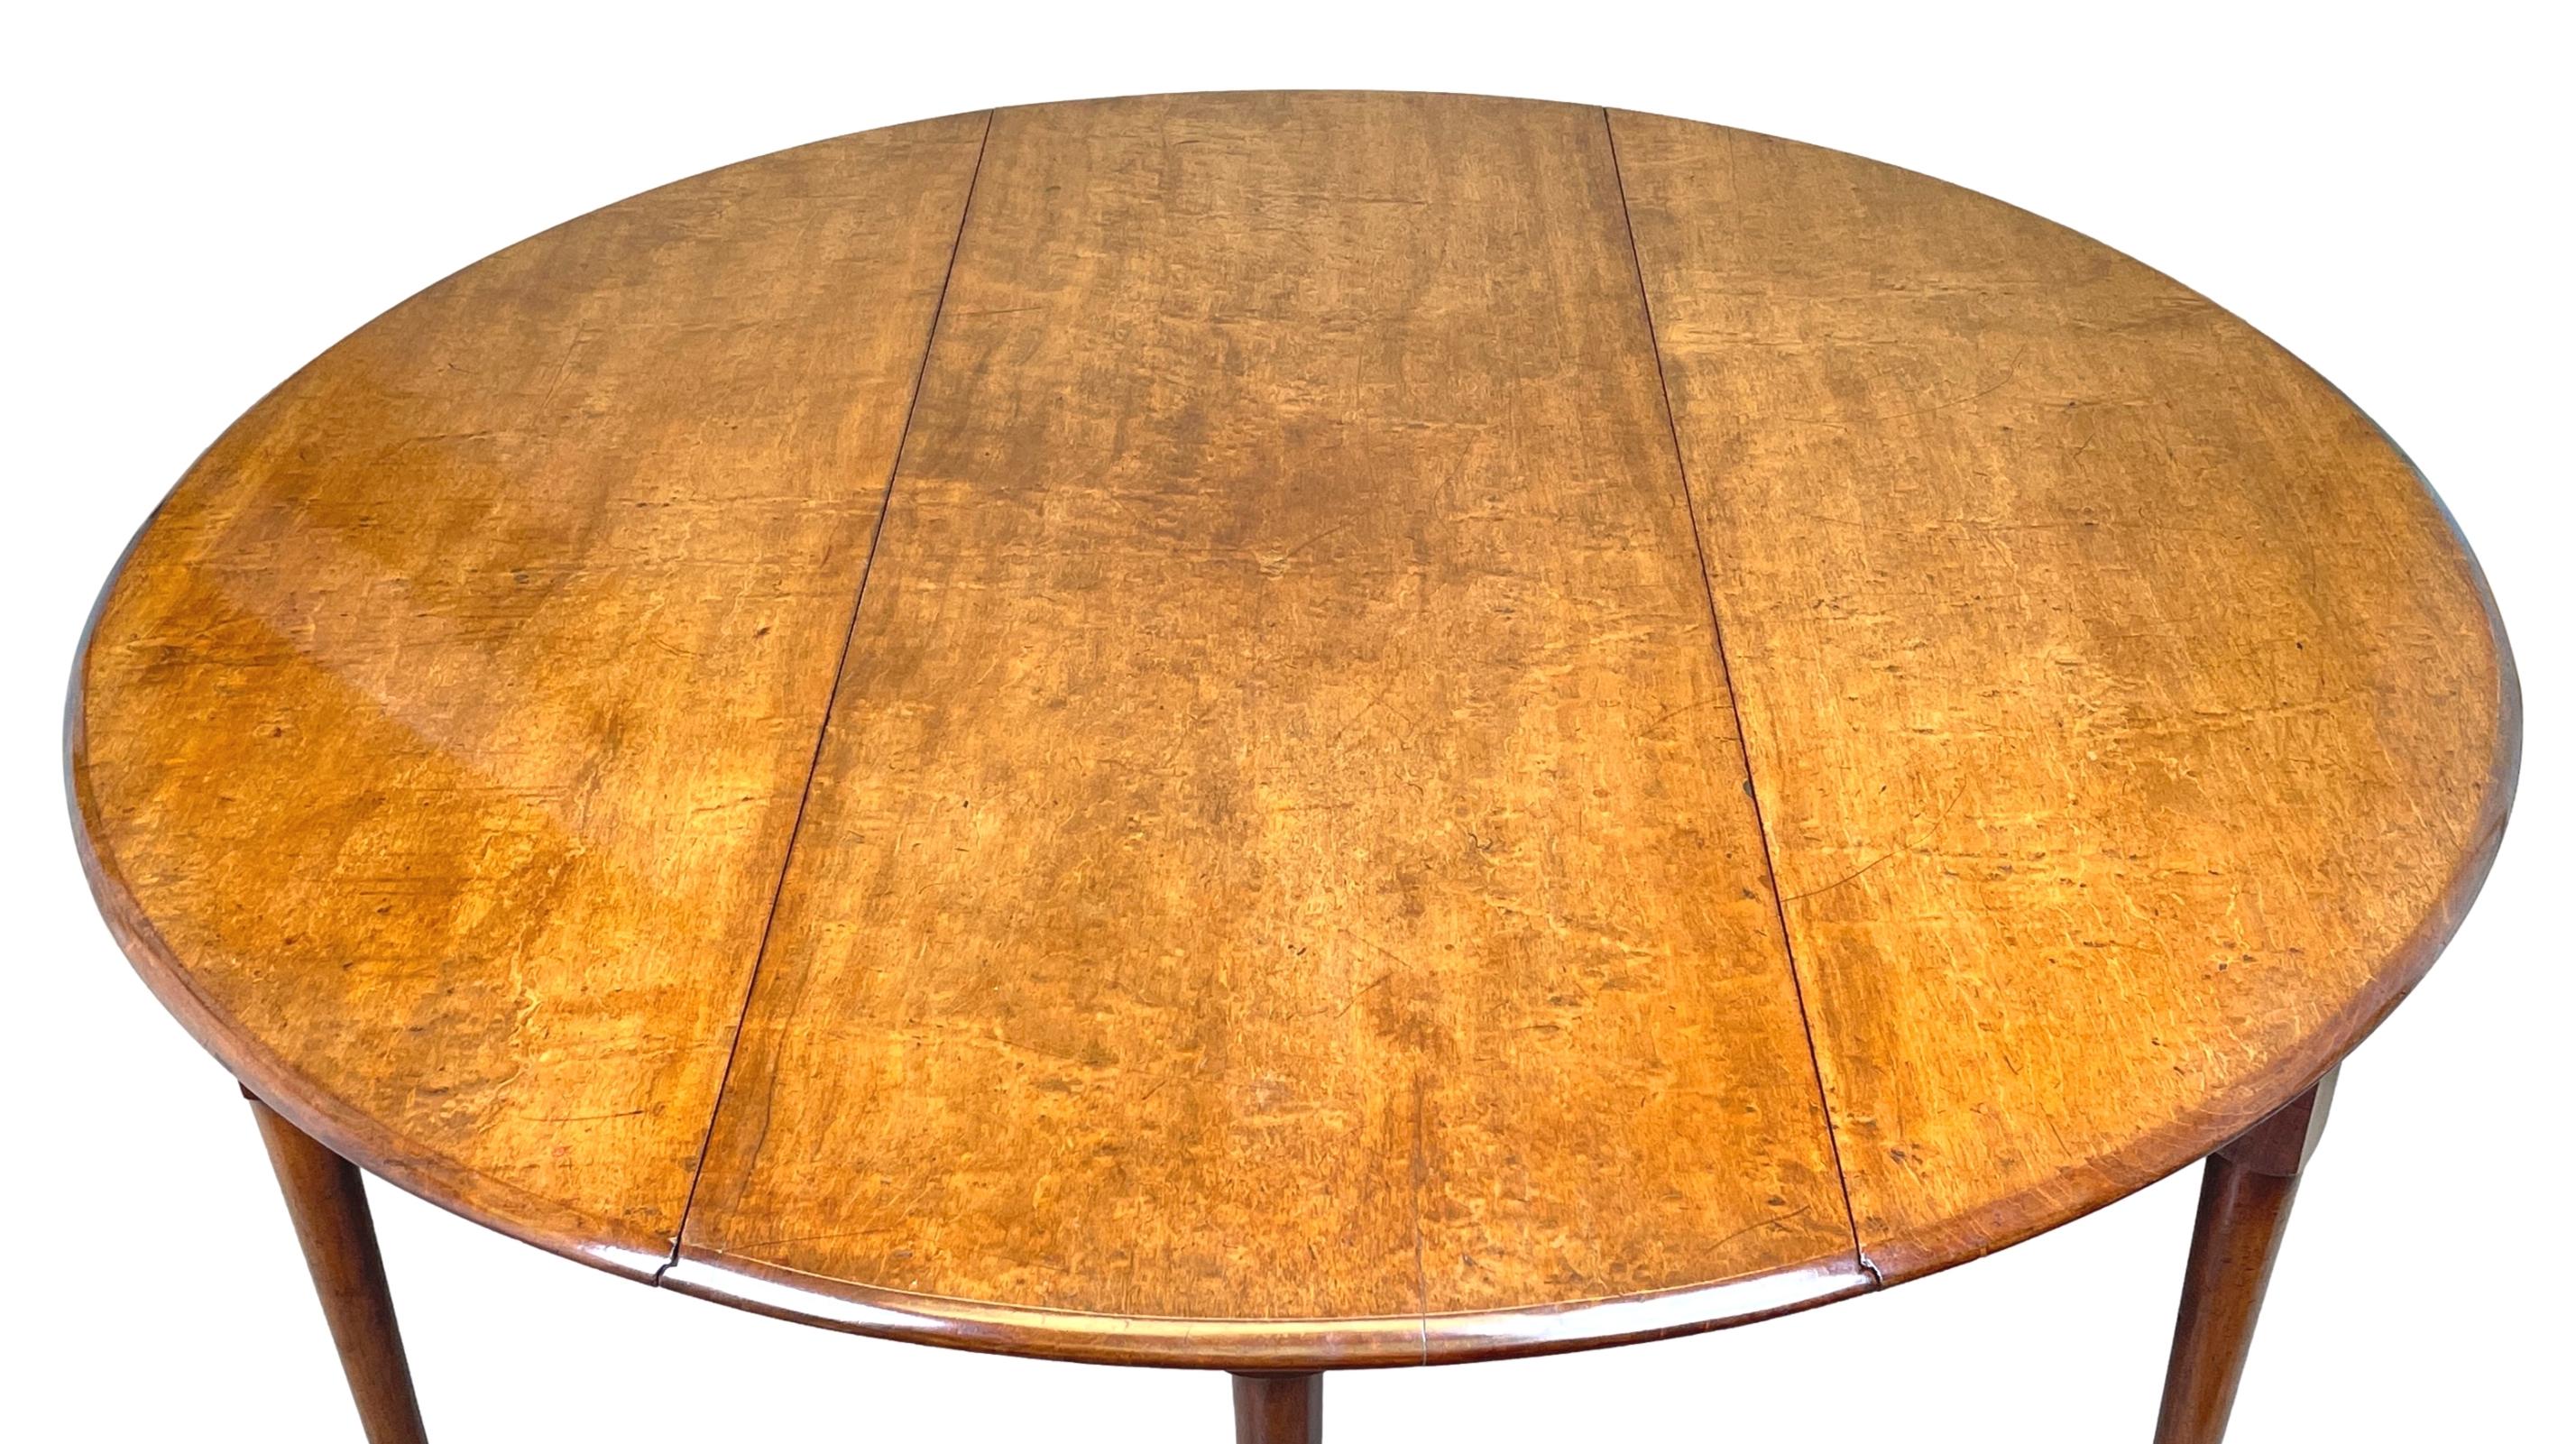 A superb mid-18th century solid Mahogany circular drop leaf dining table, to seat 8-10 people, having superbly figured top of good untouched colour and patina raised on six elegant turned legs terminating on original pad feet. 

It is most rare to